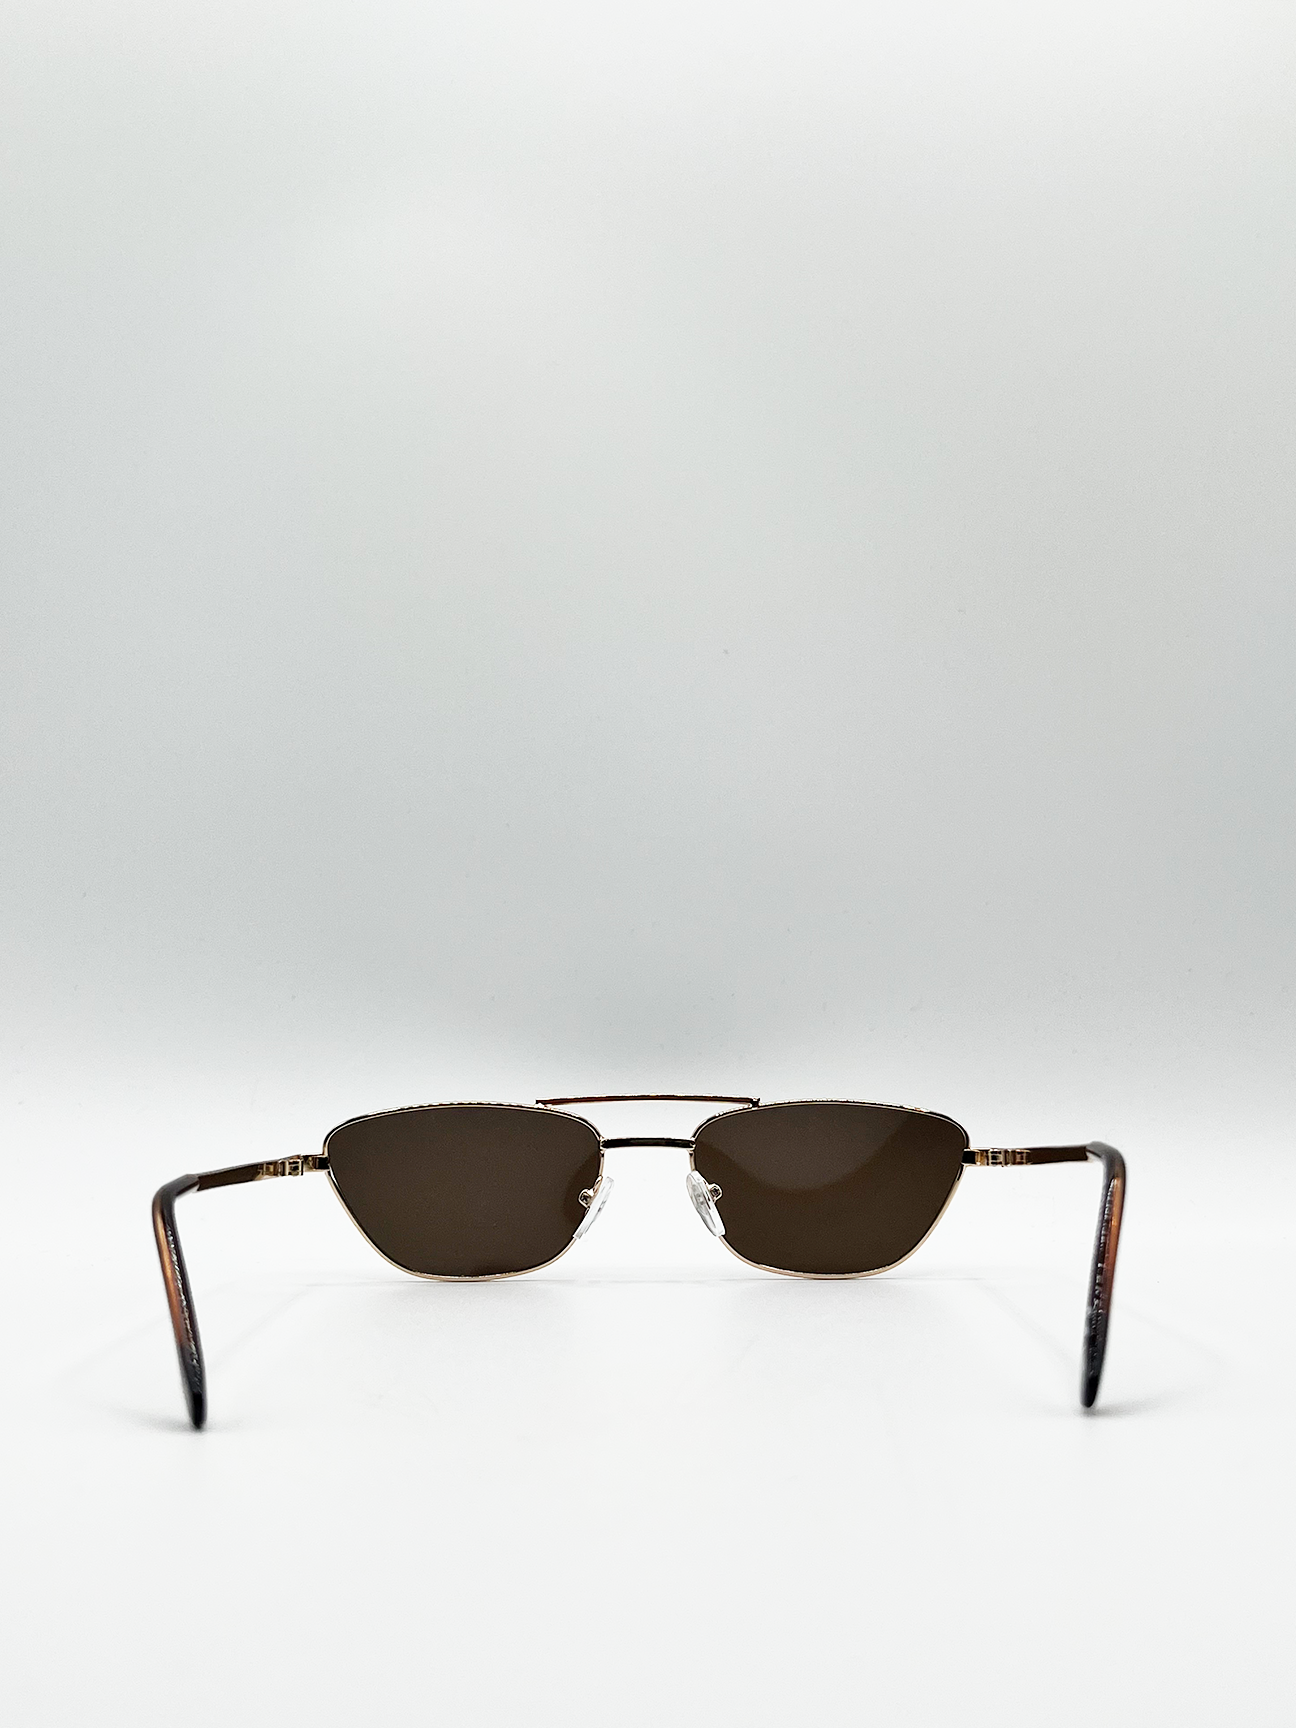 Aviator Style Sunglasses with Brown Lenses